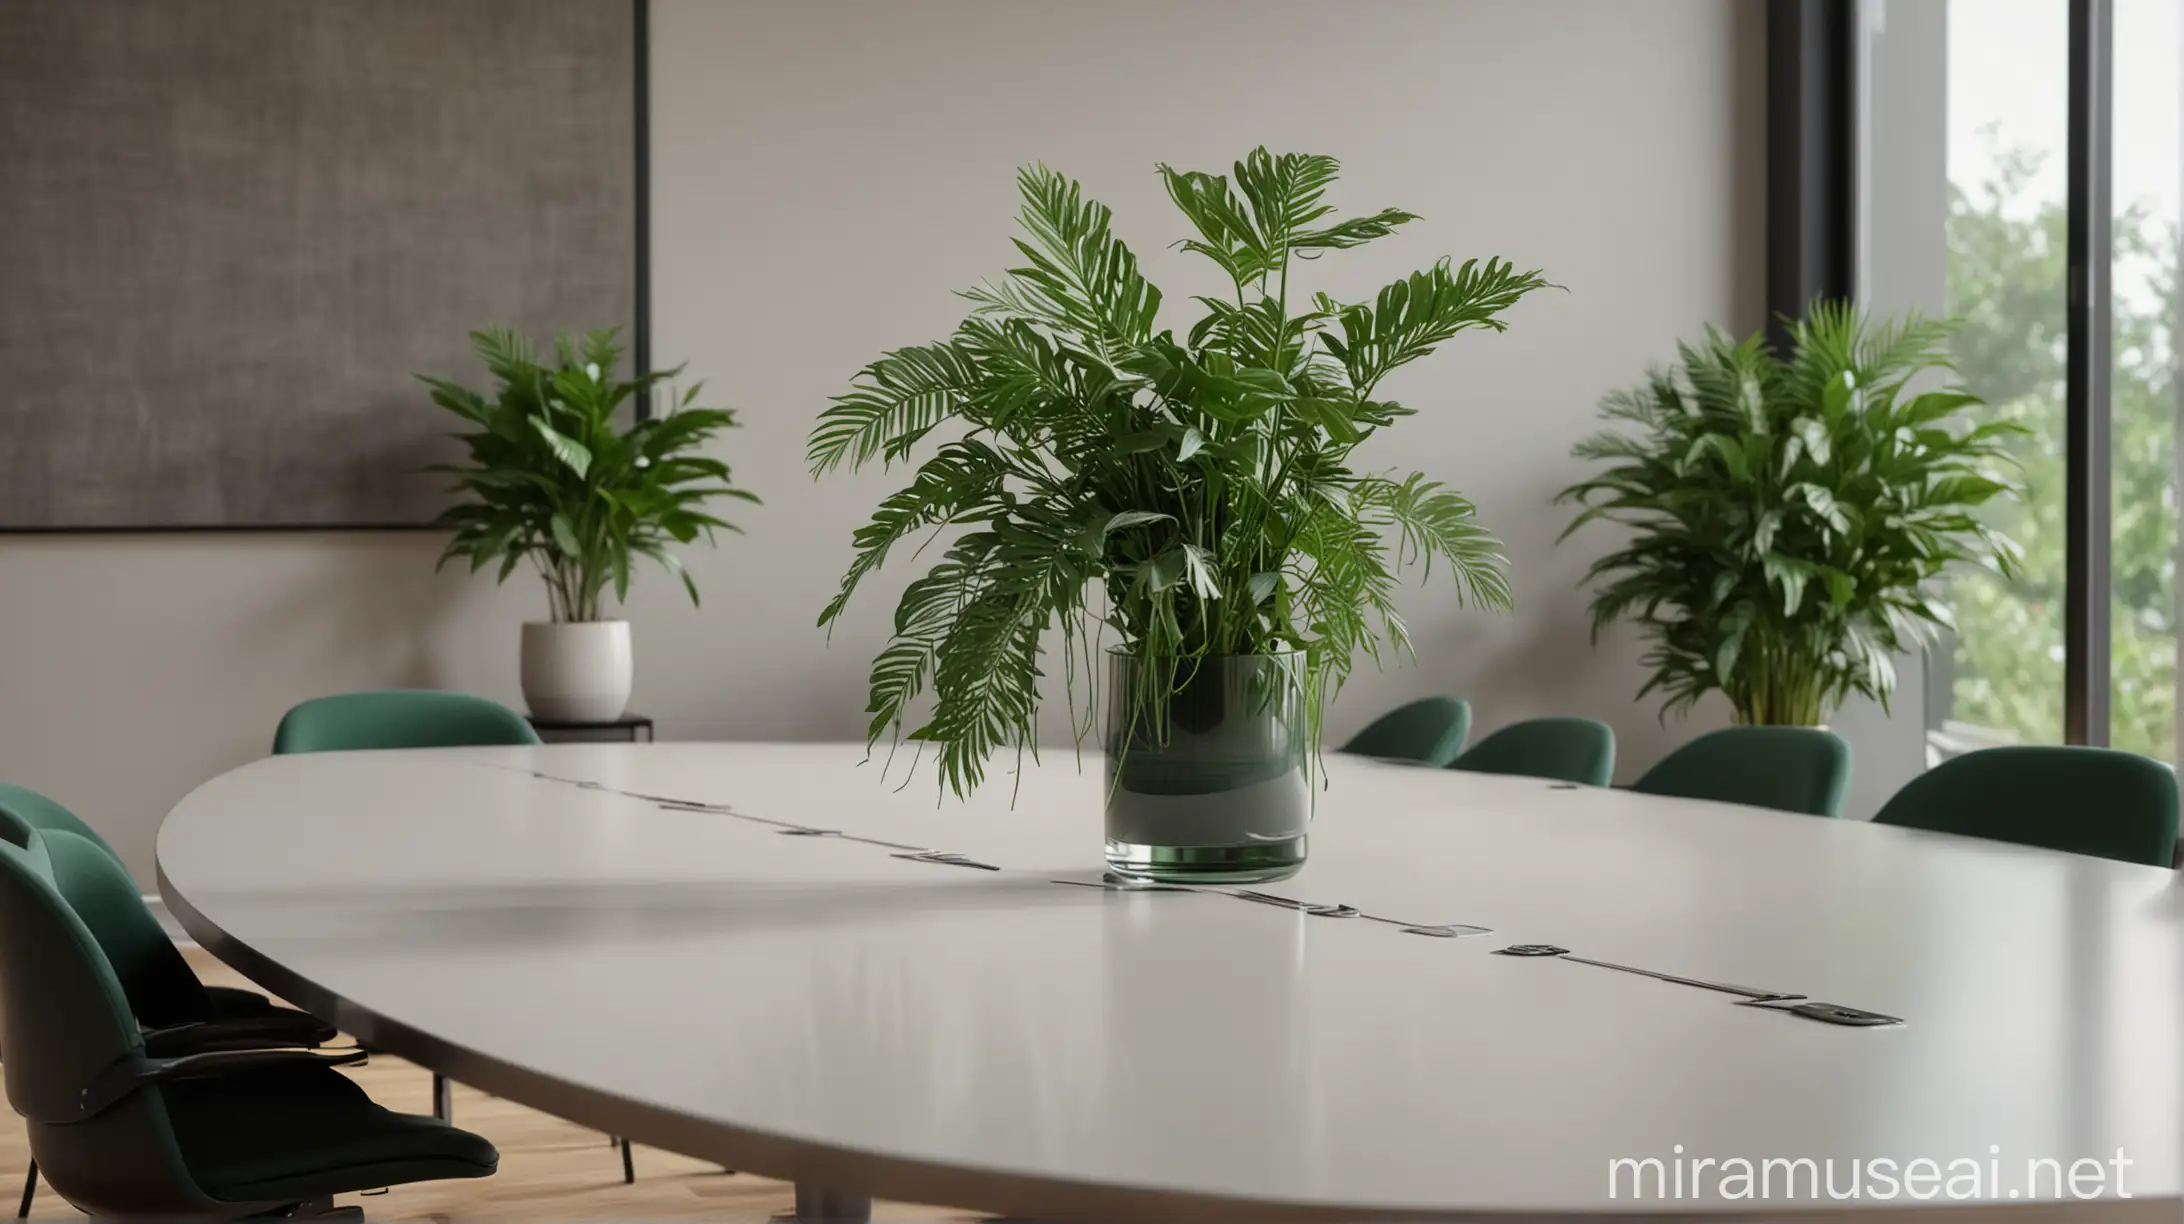 photorealistic image shot with Canon EOS R5, A close-up shot of a conference table, showcasing its minimalist design and the sleek, modern chairs surrounding it. The table is decorated with a vase of green plants, adding a touch of nature to the space. The camera angle is slightly tilted, creating a dynamic and inviting perspective.